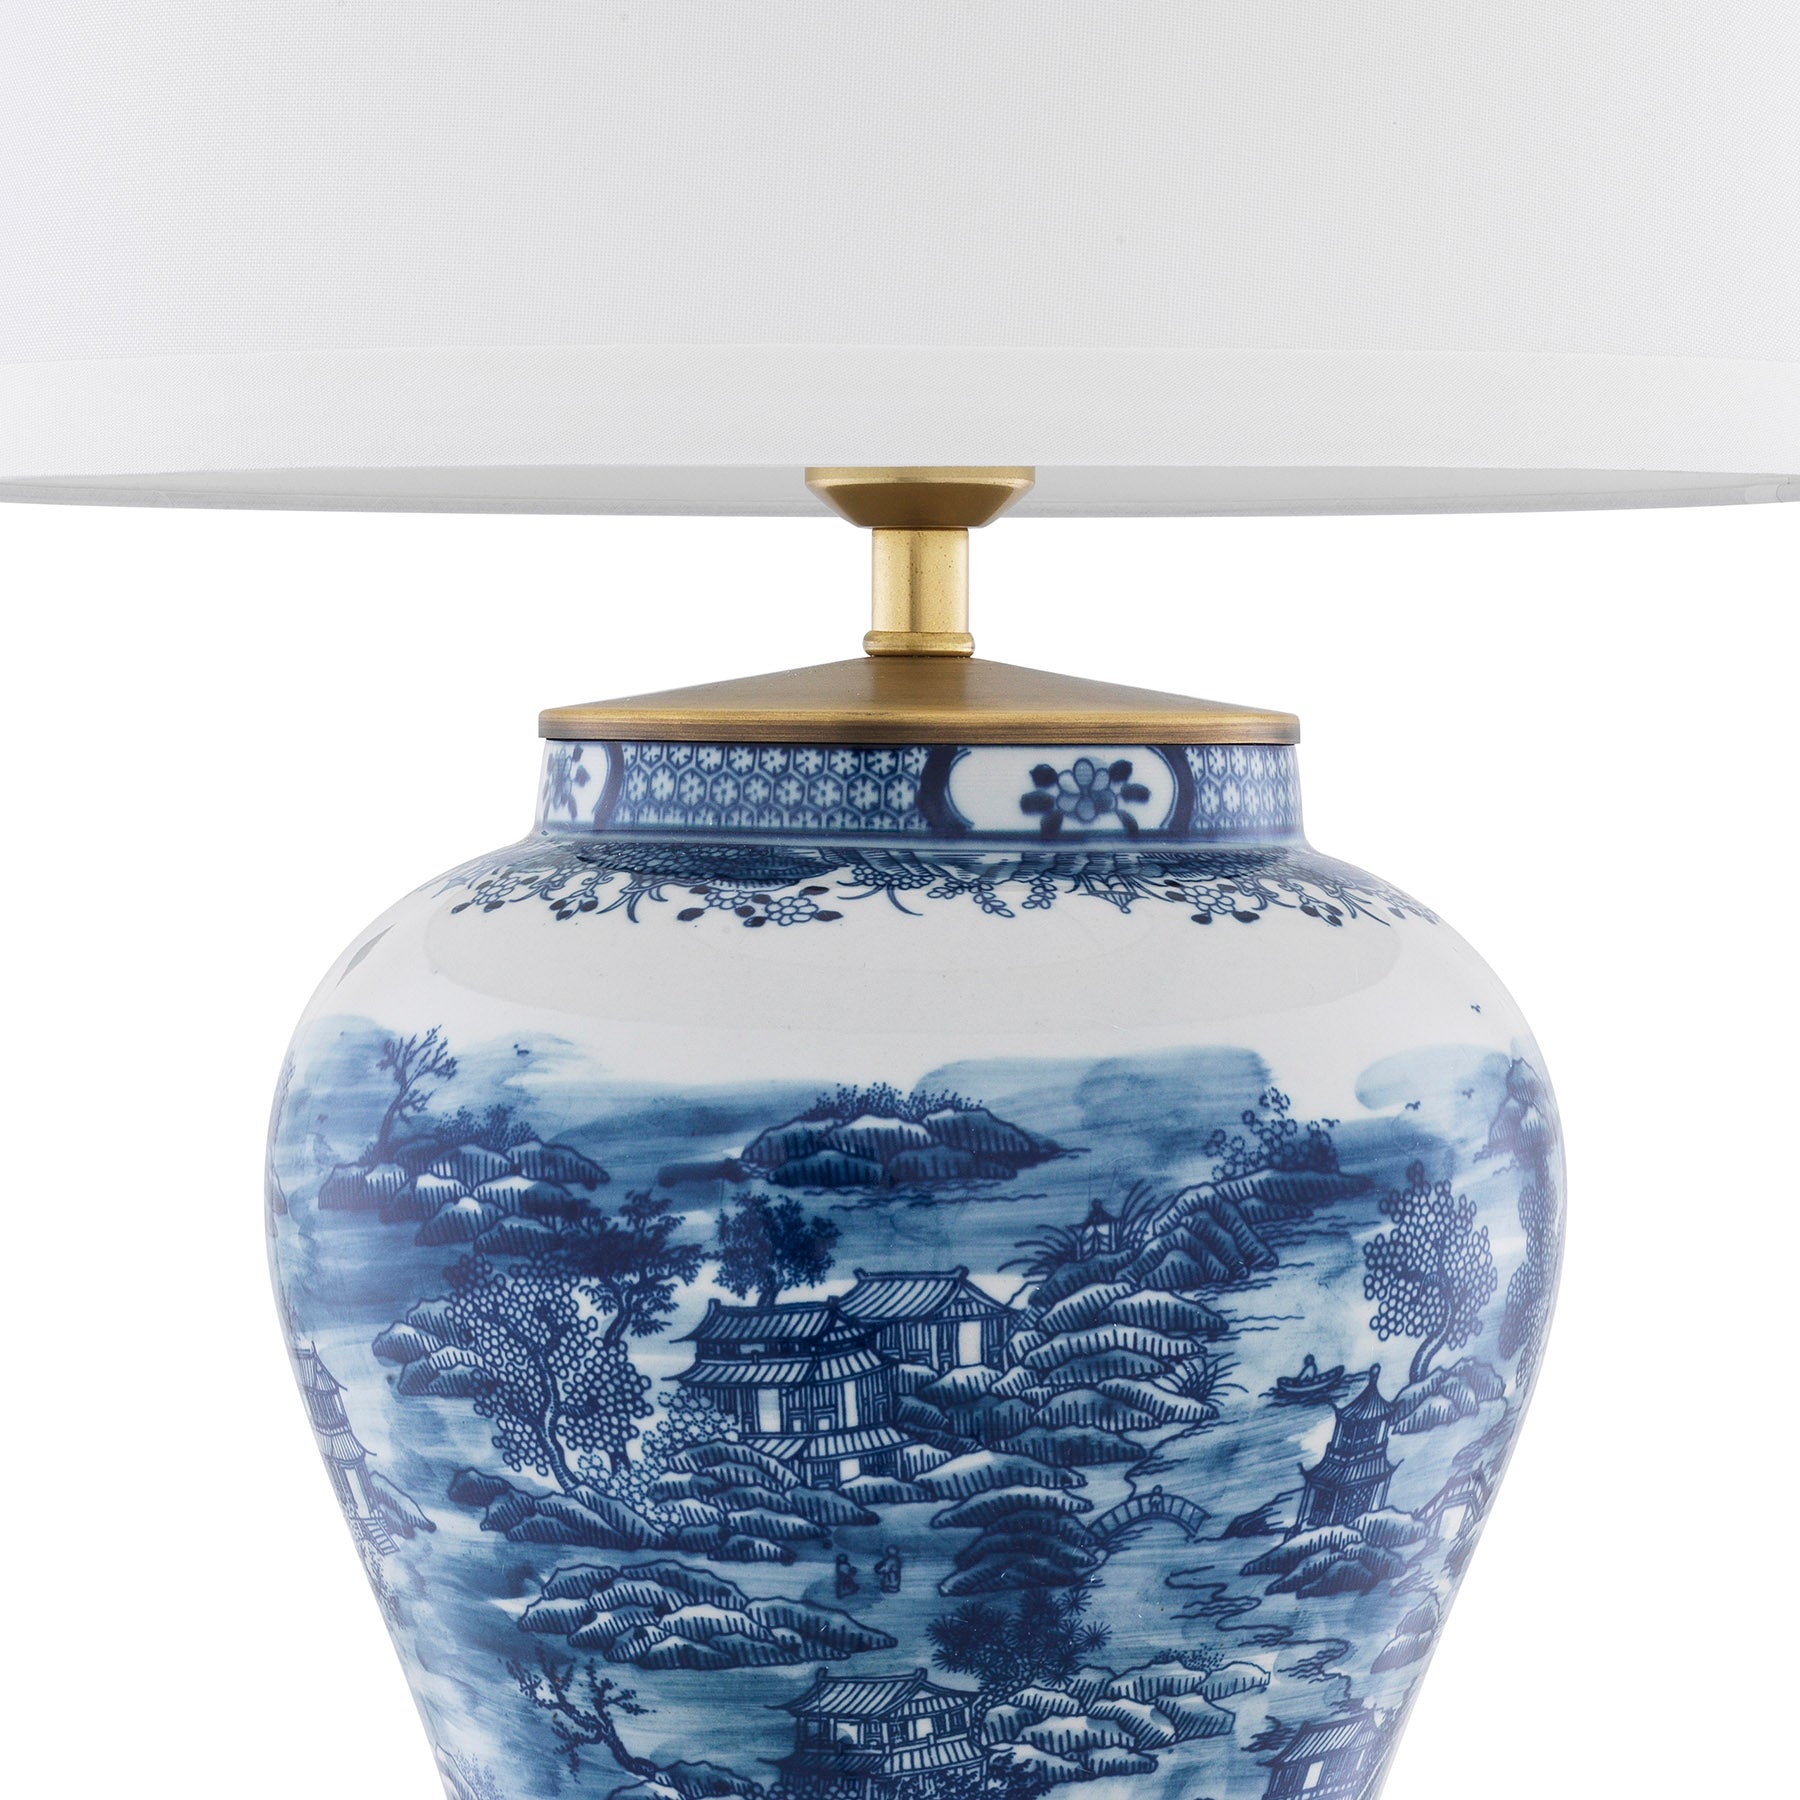 CHINESE BLUE - Table Lamp